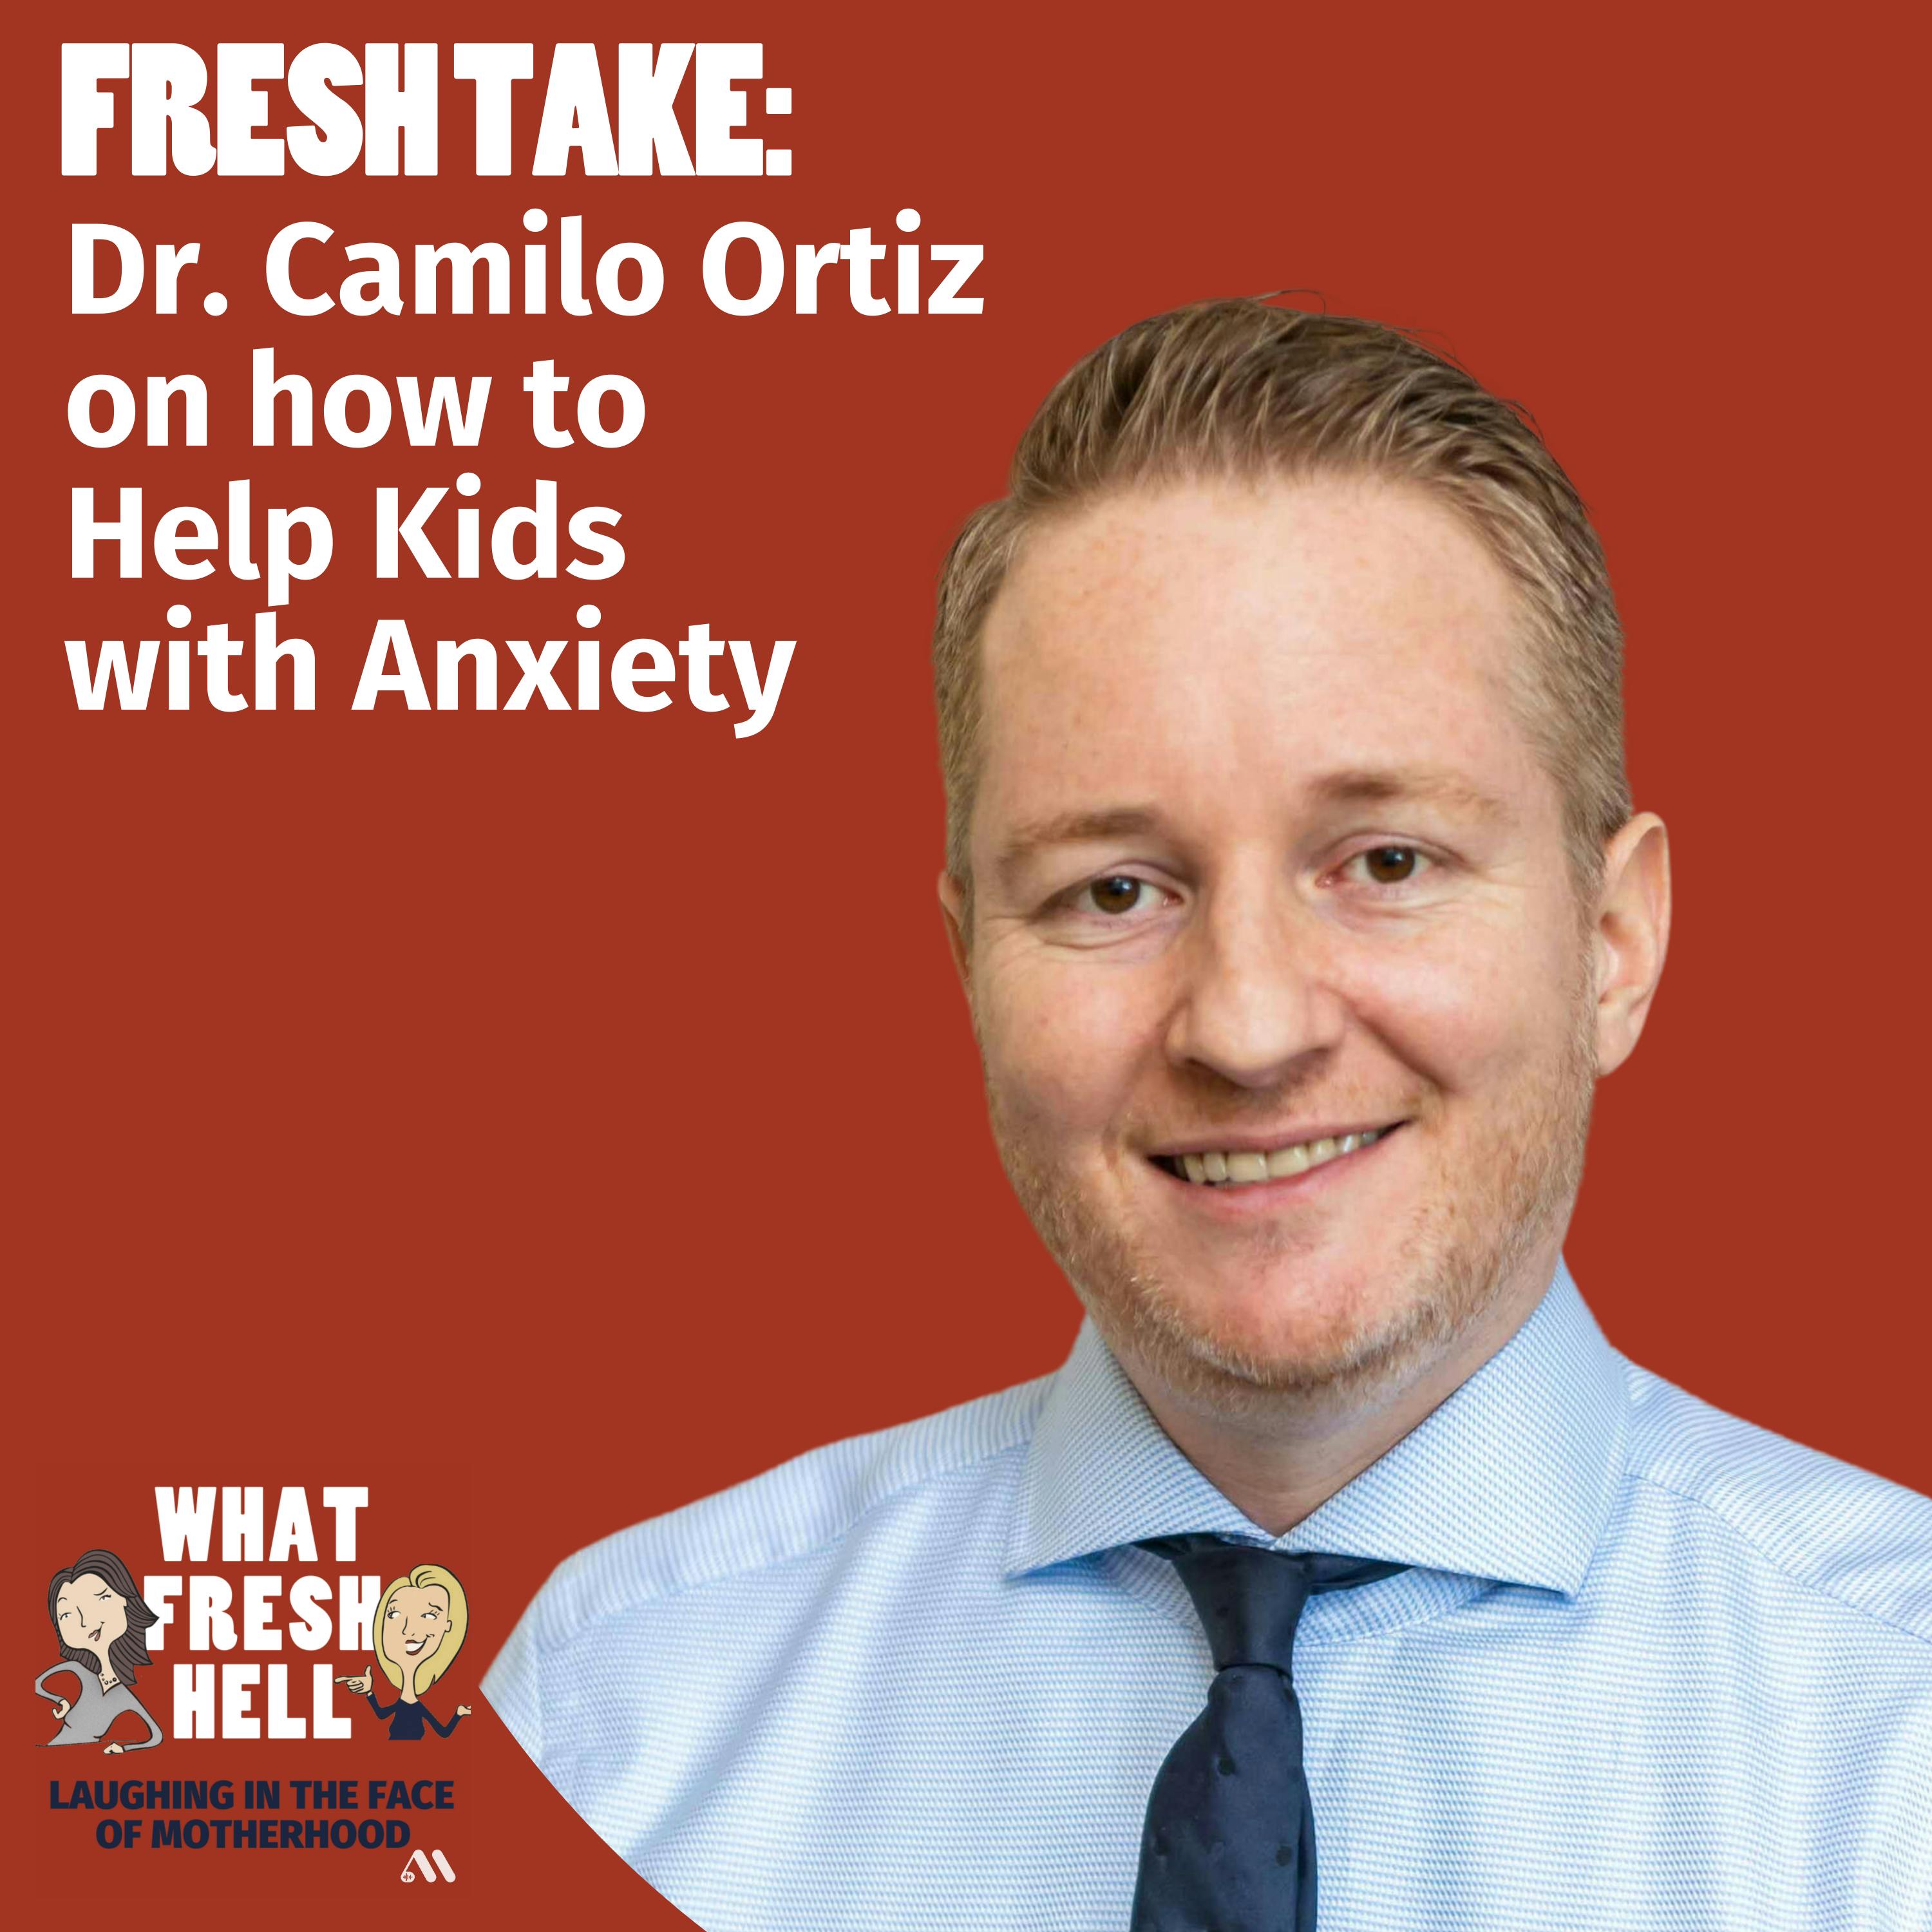 Fresh Take: Dr. Camilo Ortiz on How to Help Kids With Anxiety